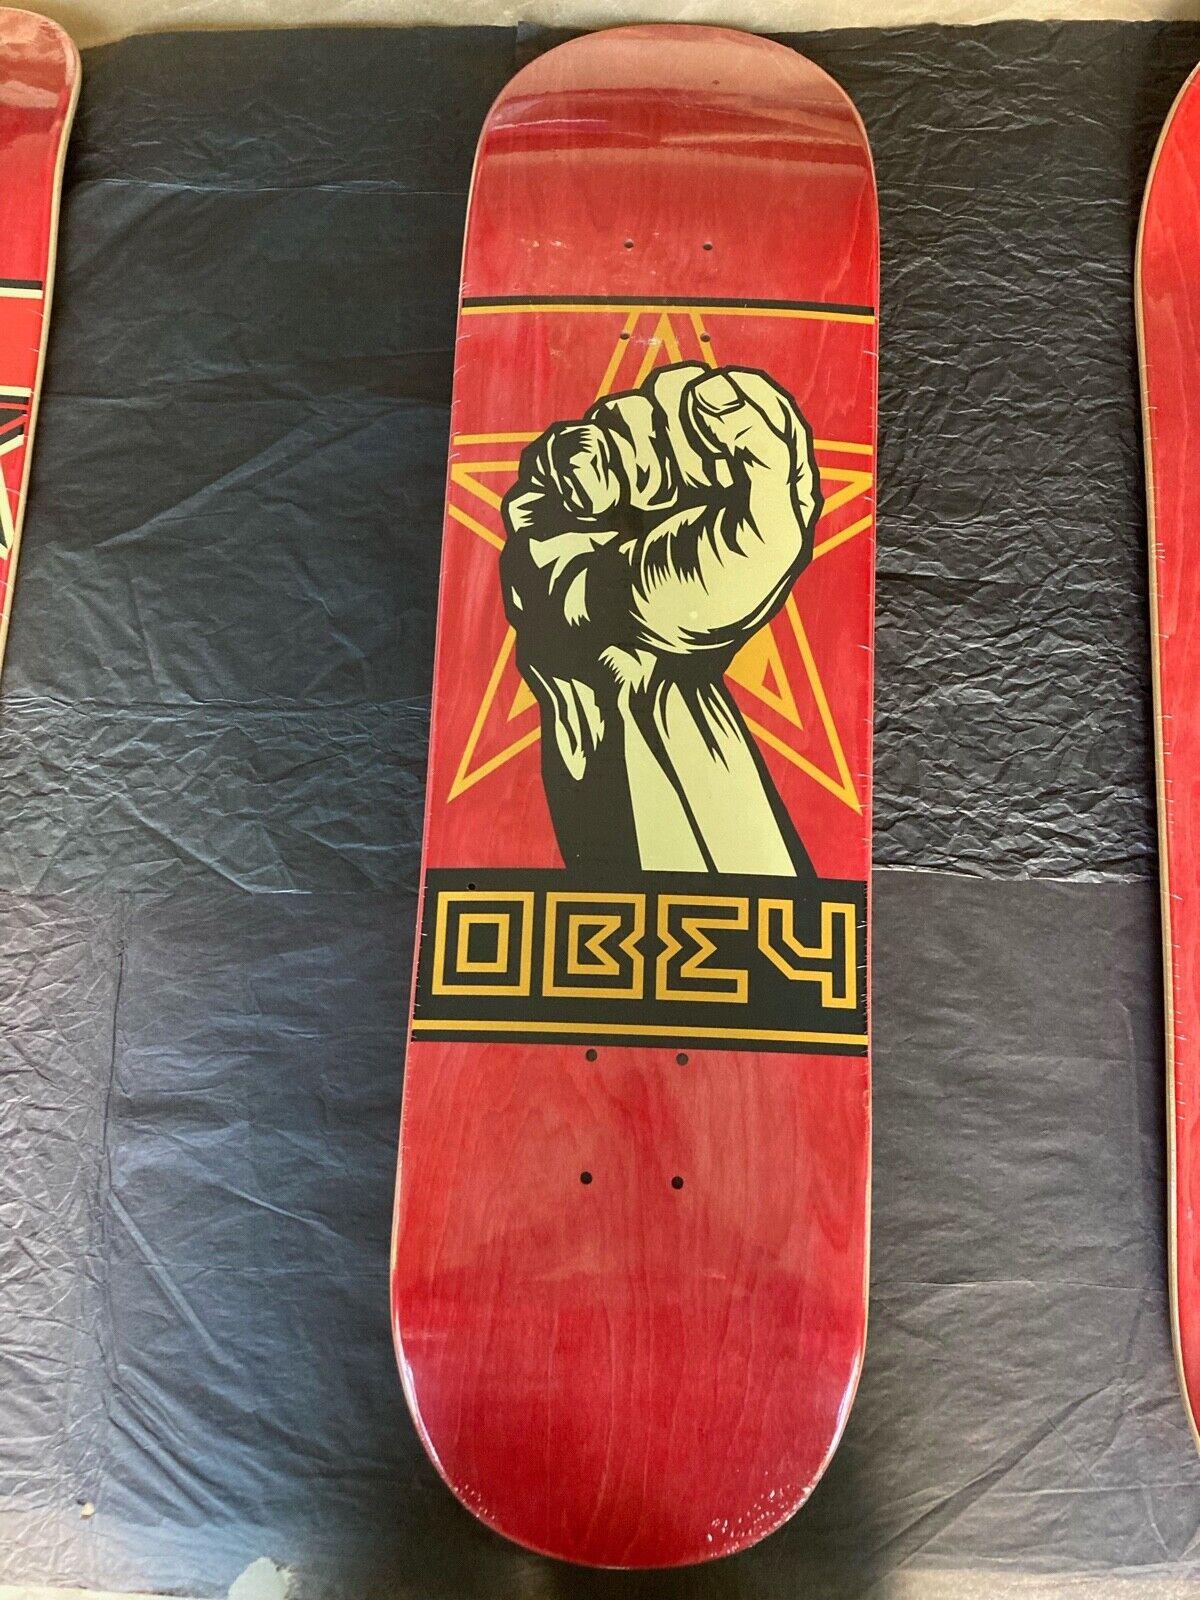 Shepard Fairey Obey Giant 30th Anniversary Skateboard Set of 3 Limited to 300 For Sale 1